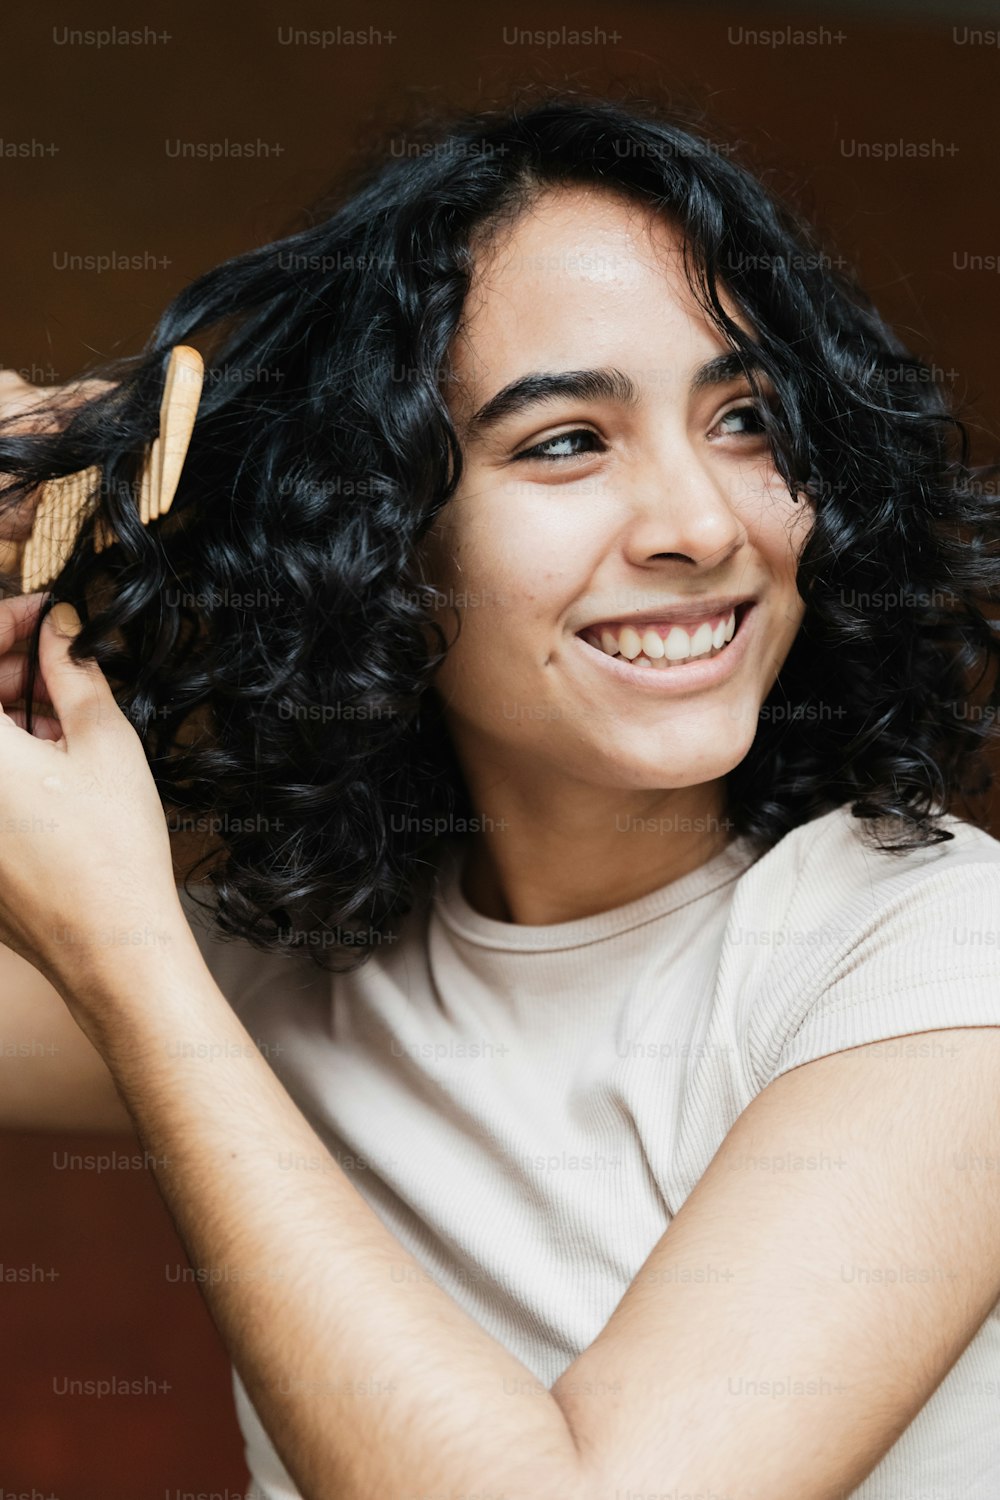 a woman is smiling and holding a hair brush